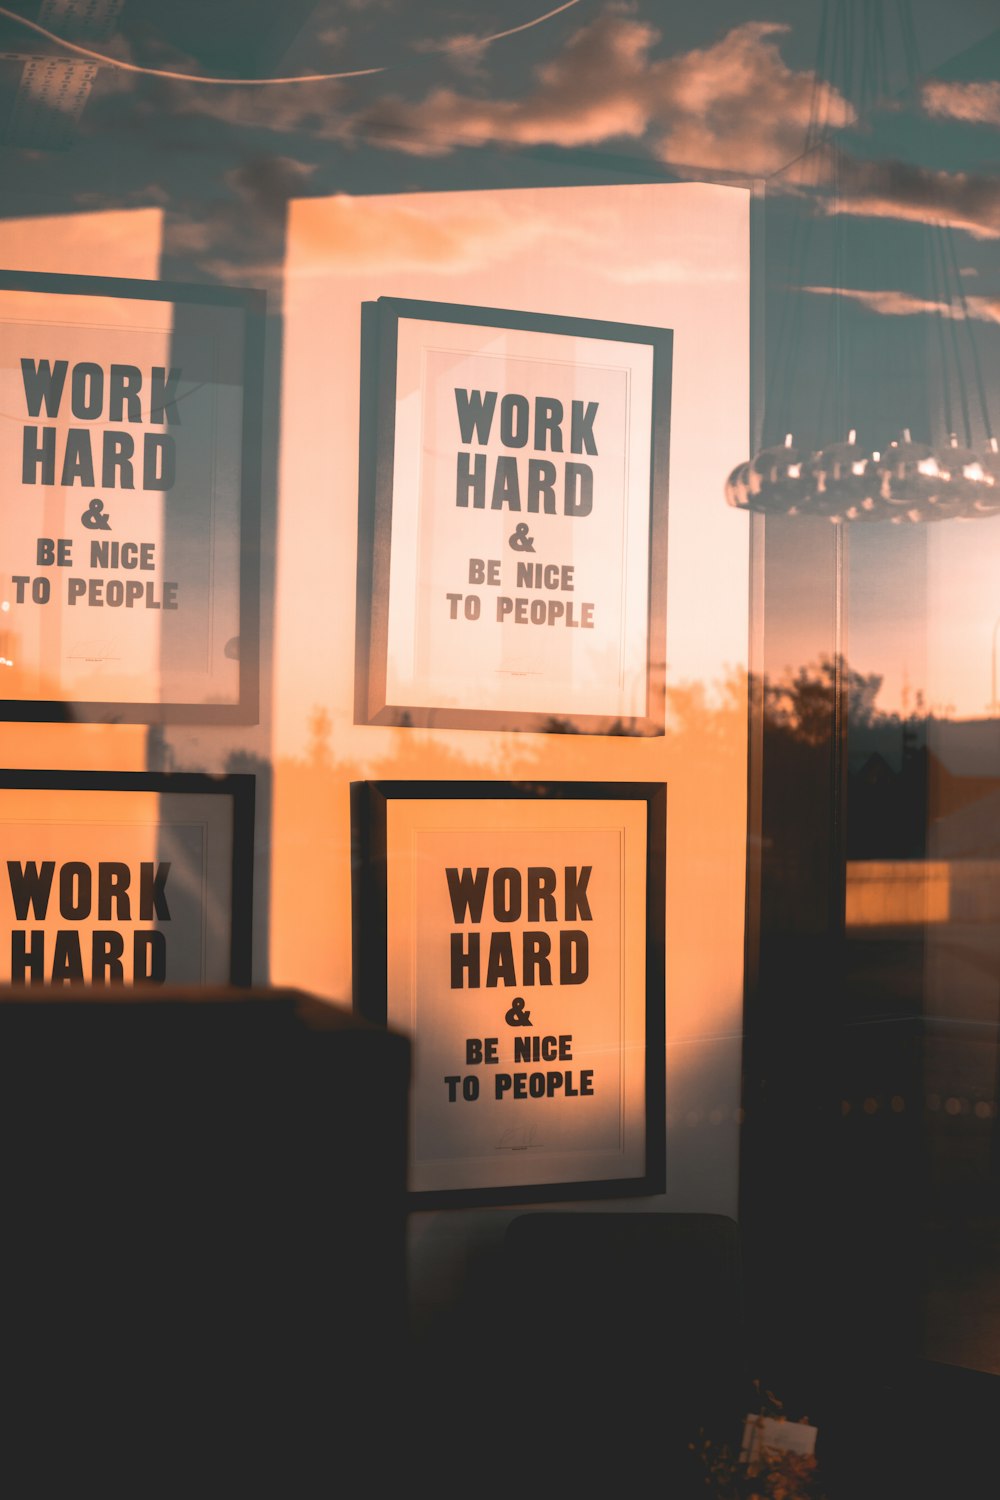 Work Hard & Be Nice To People wall quote posters